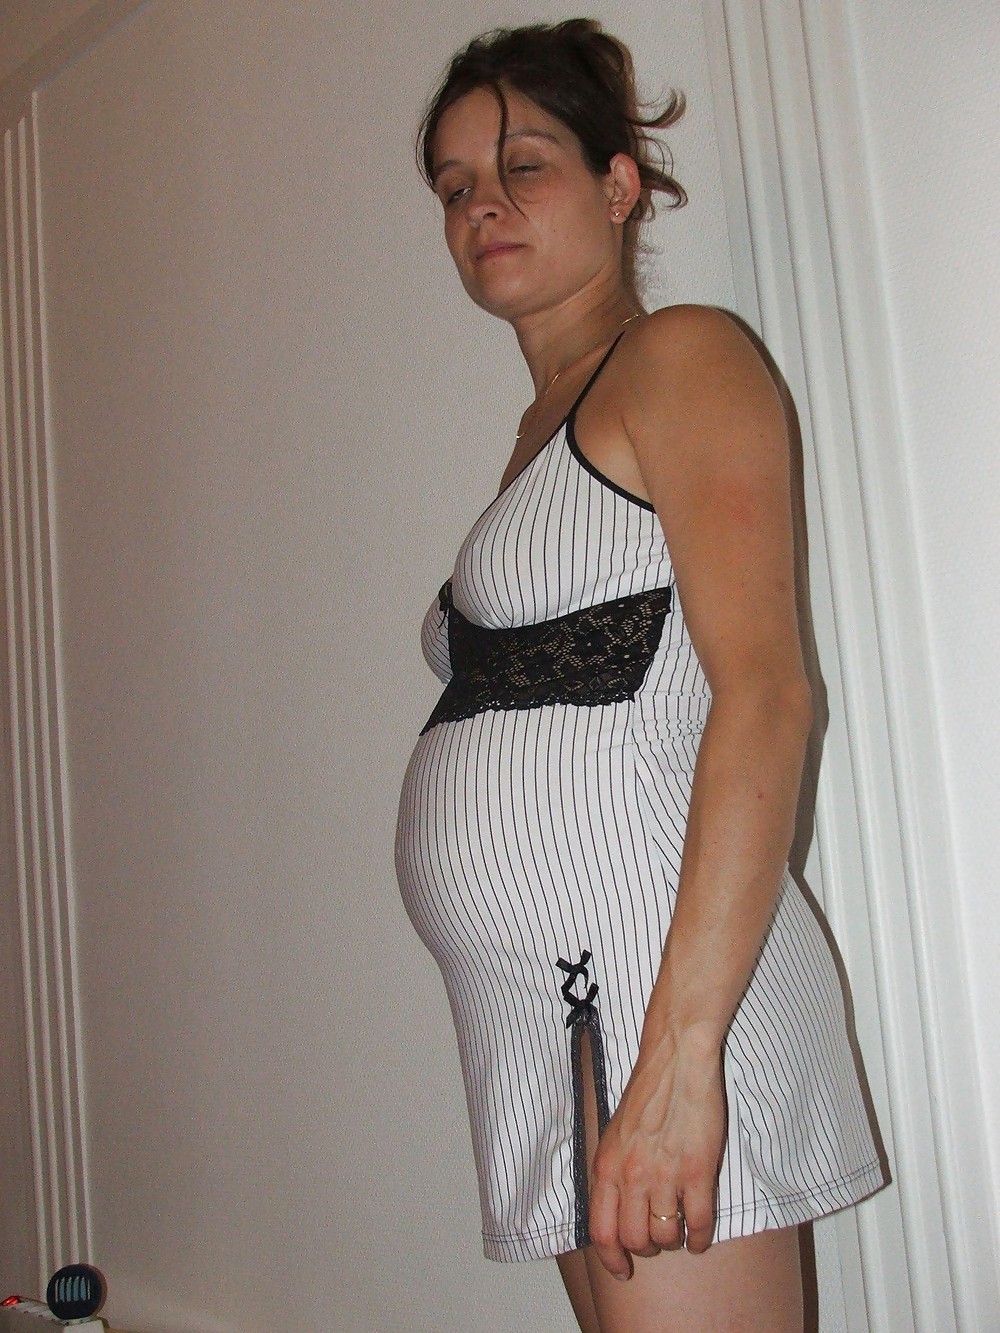 Pregnant - before, during and after 1 #16227214